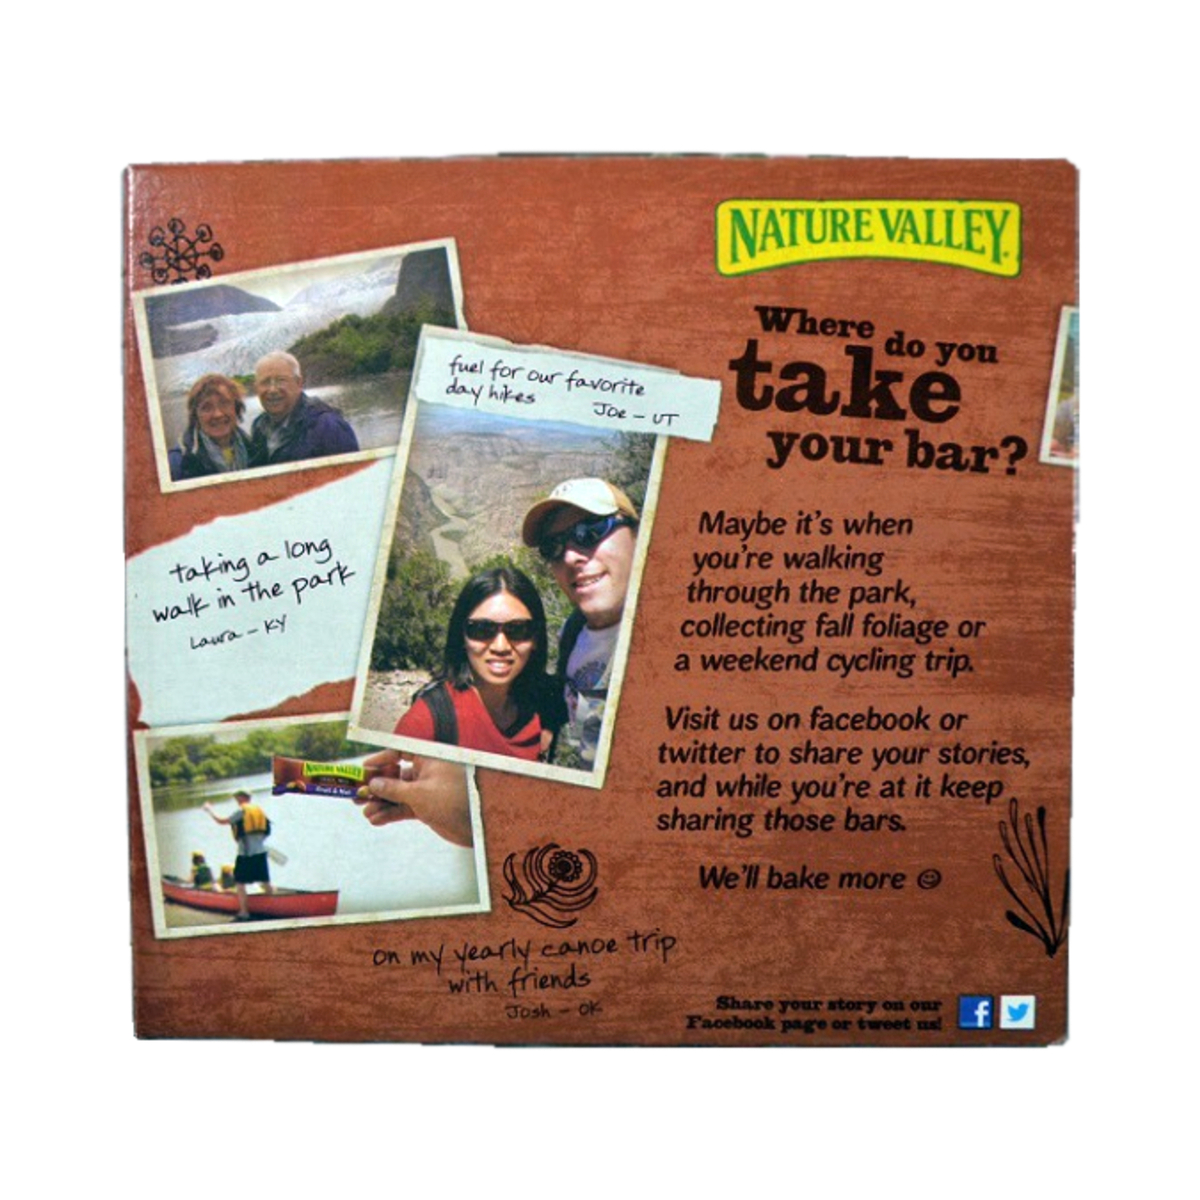 Nature Valley Trail Mix Chewy Granola Bars Fruit & Nut 6pcs